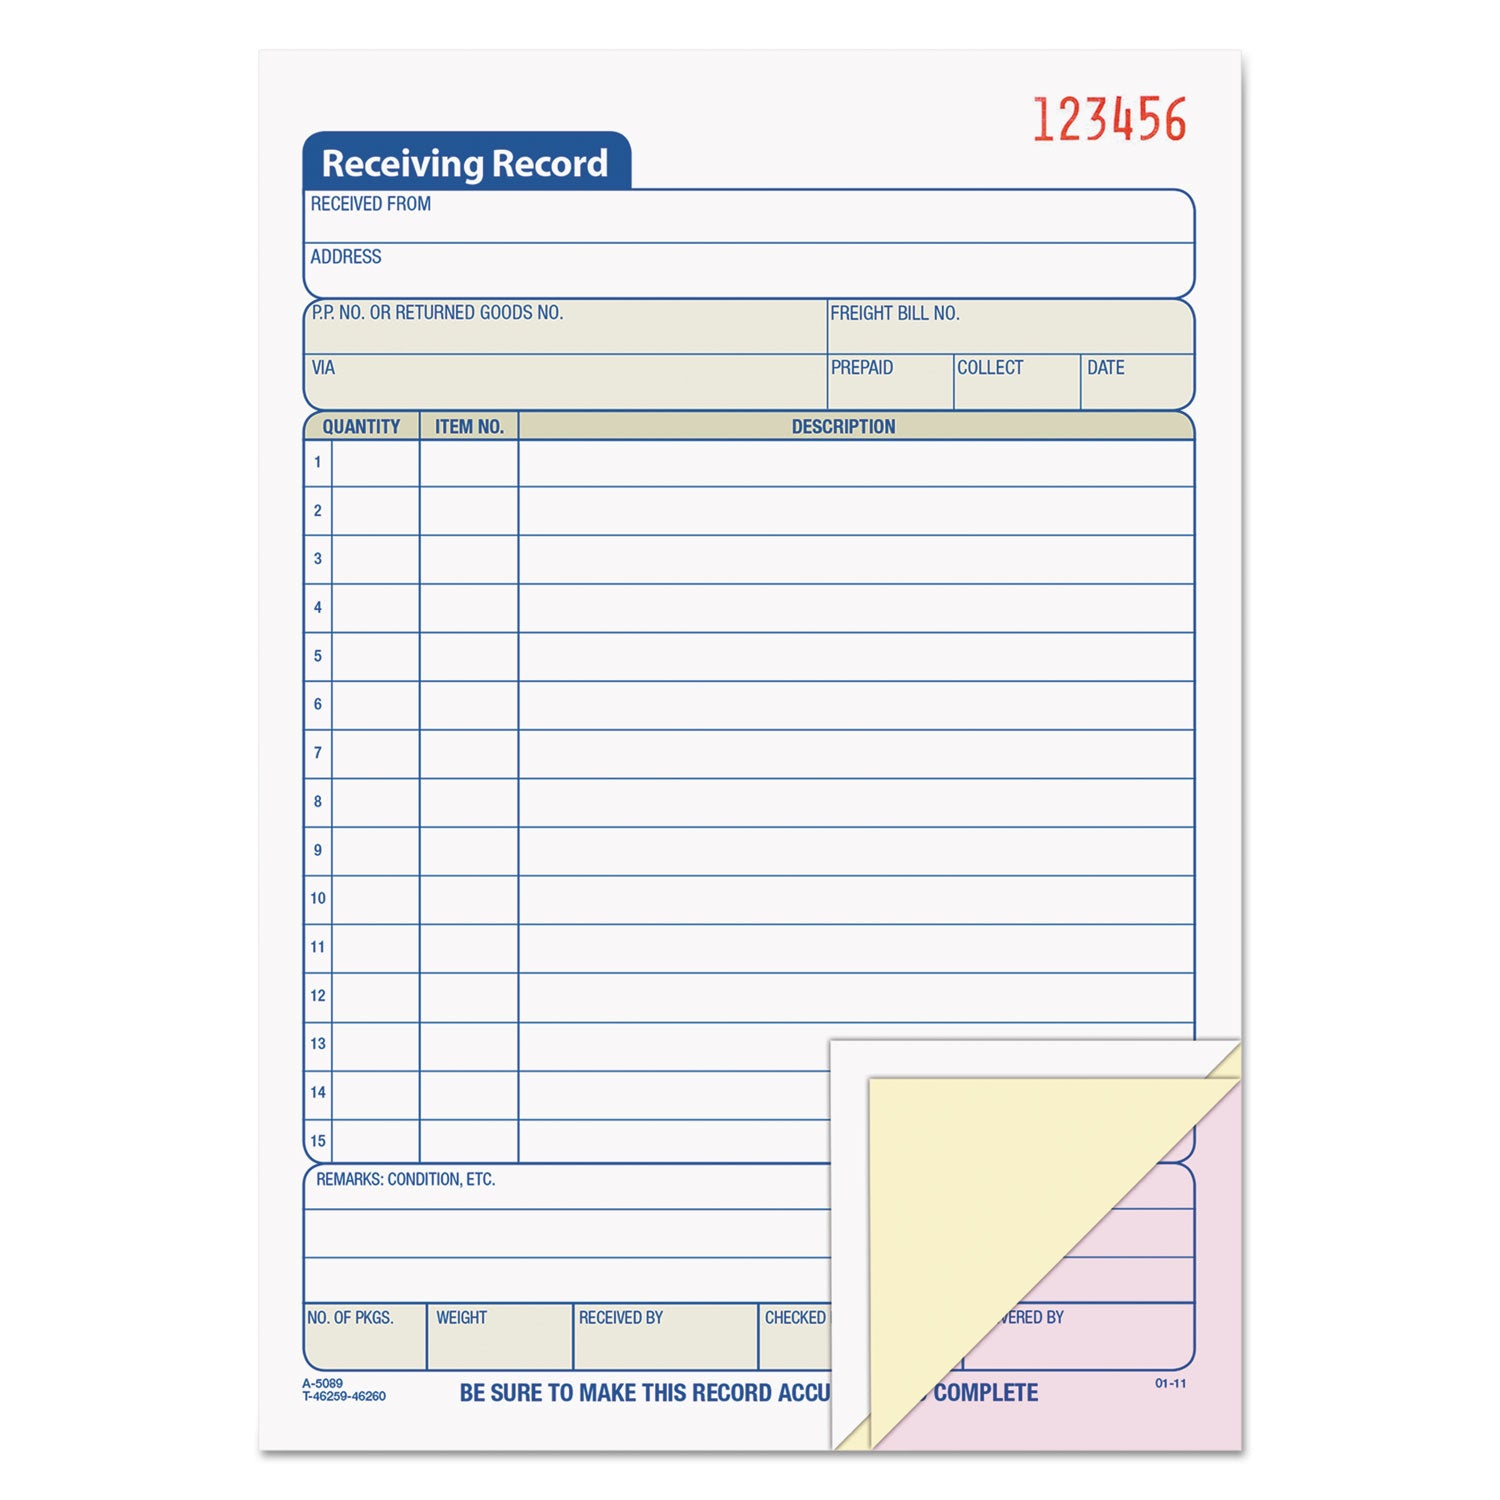 Receiving Record Book, Three-Part Carbonless, 5.56 x 7.94, 50 Forms Total - 